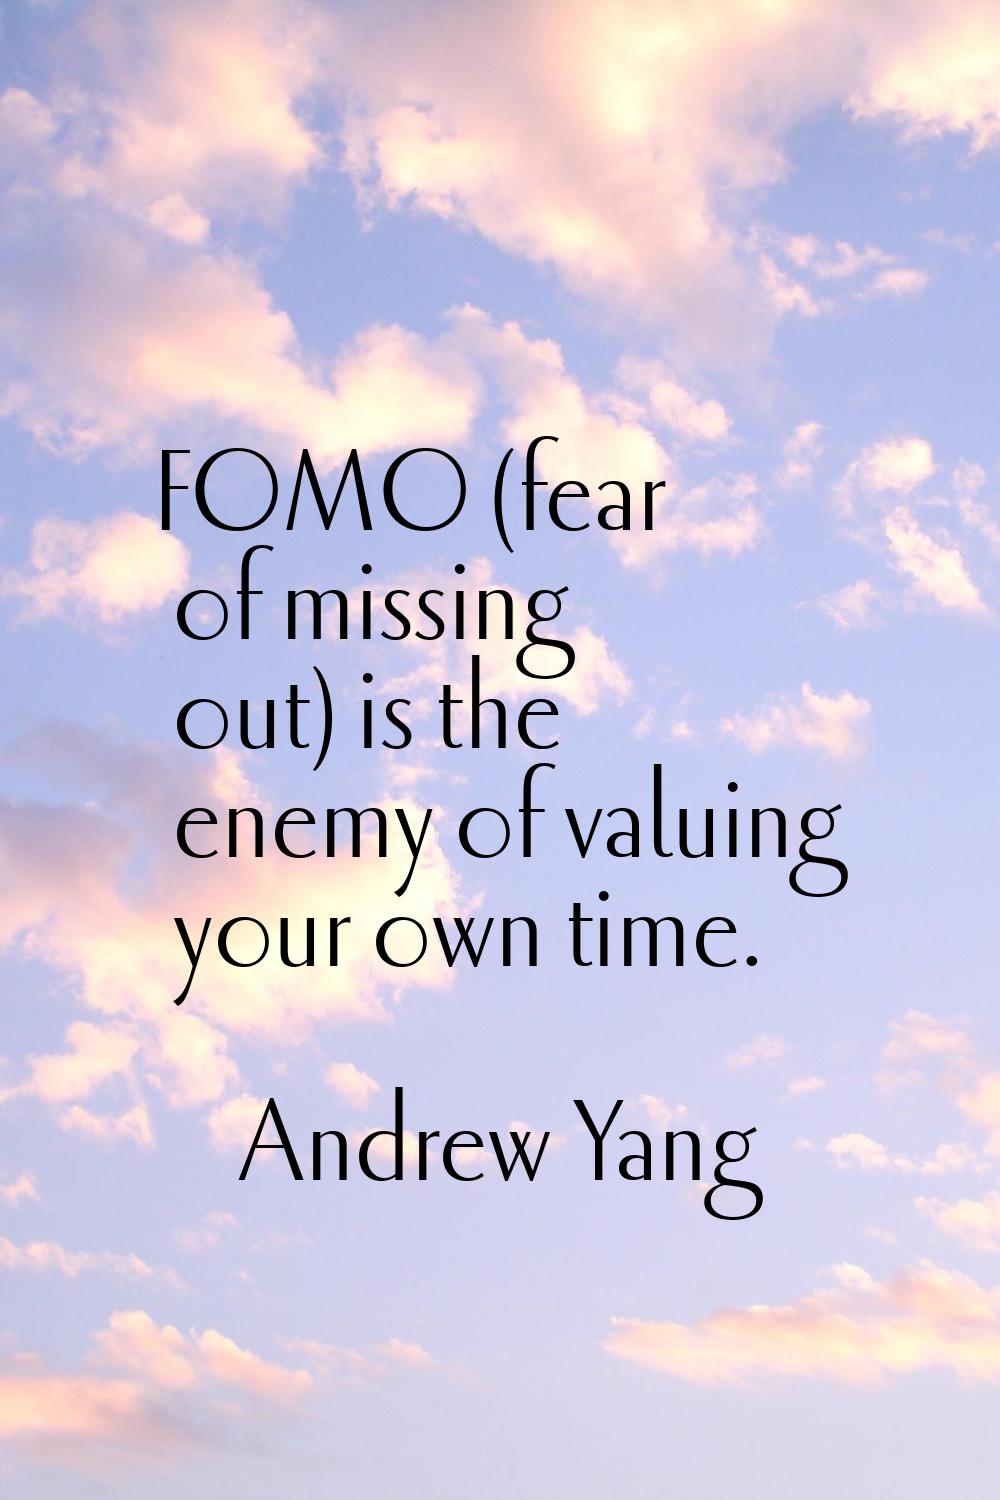 FOMO (fear of missing out) is the enemy of valuing your own time.